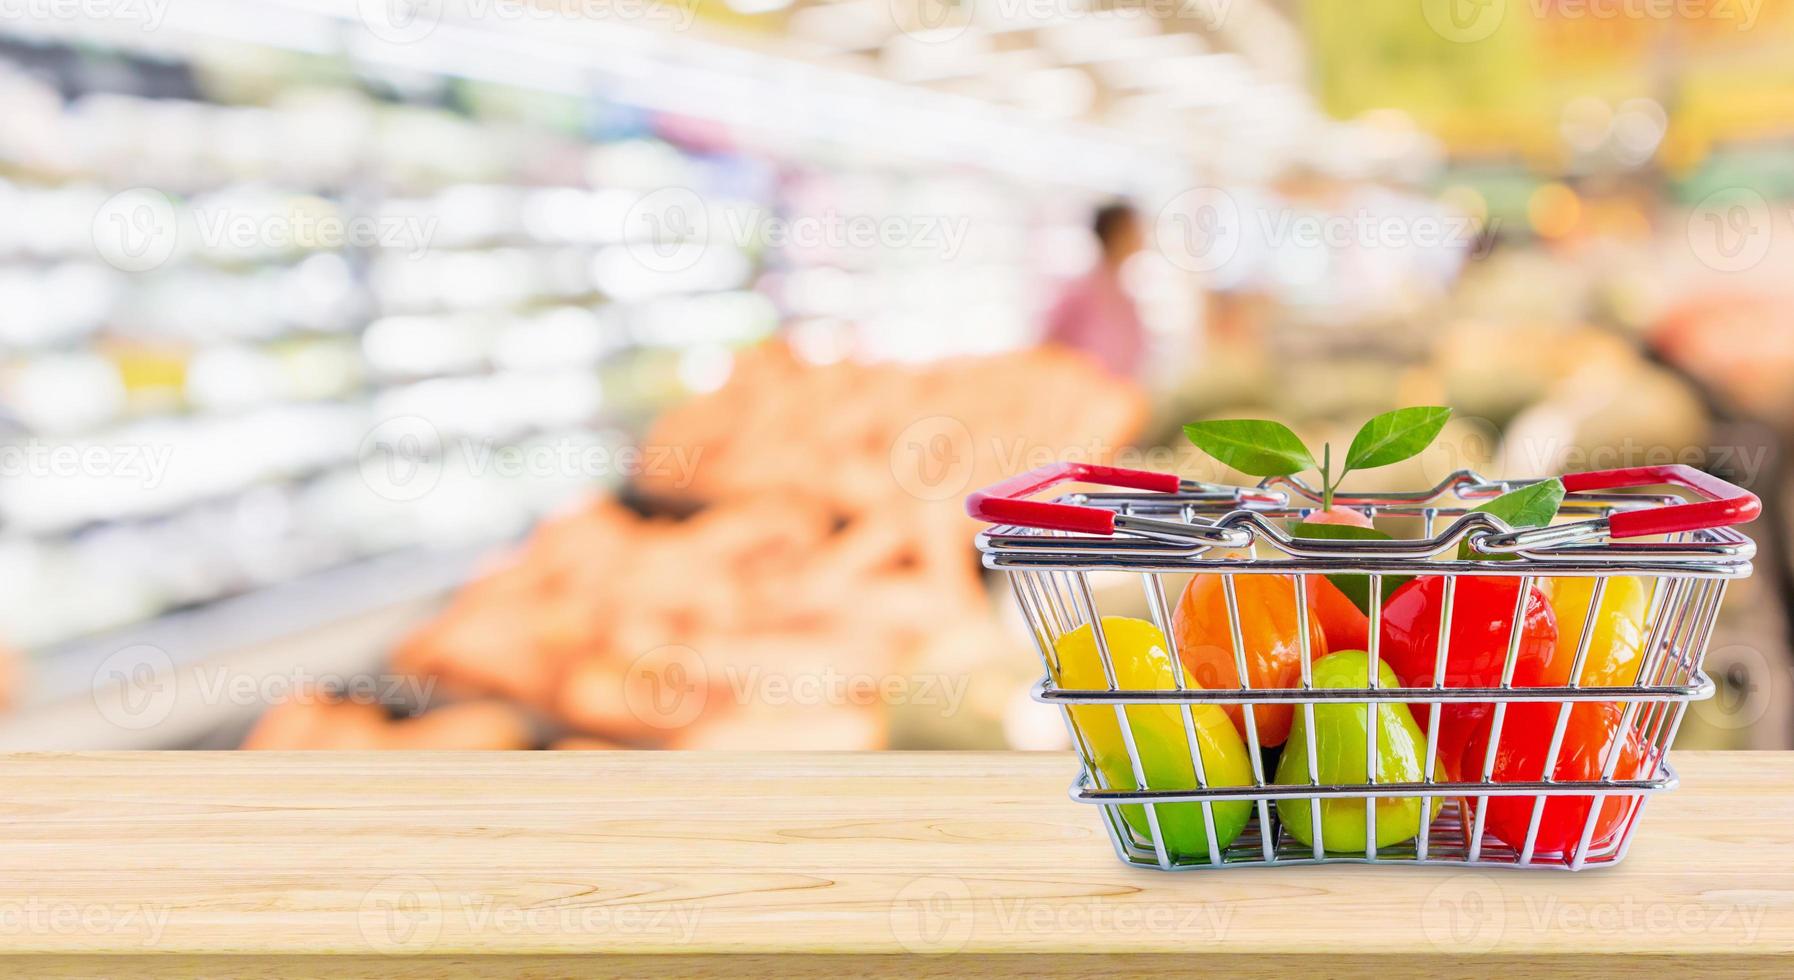 Shopping basket with fruits on wood table over grocery store supermarket blur background photo